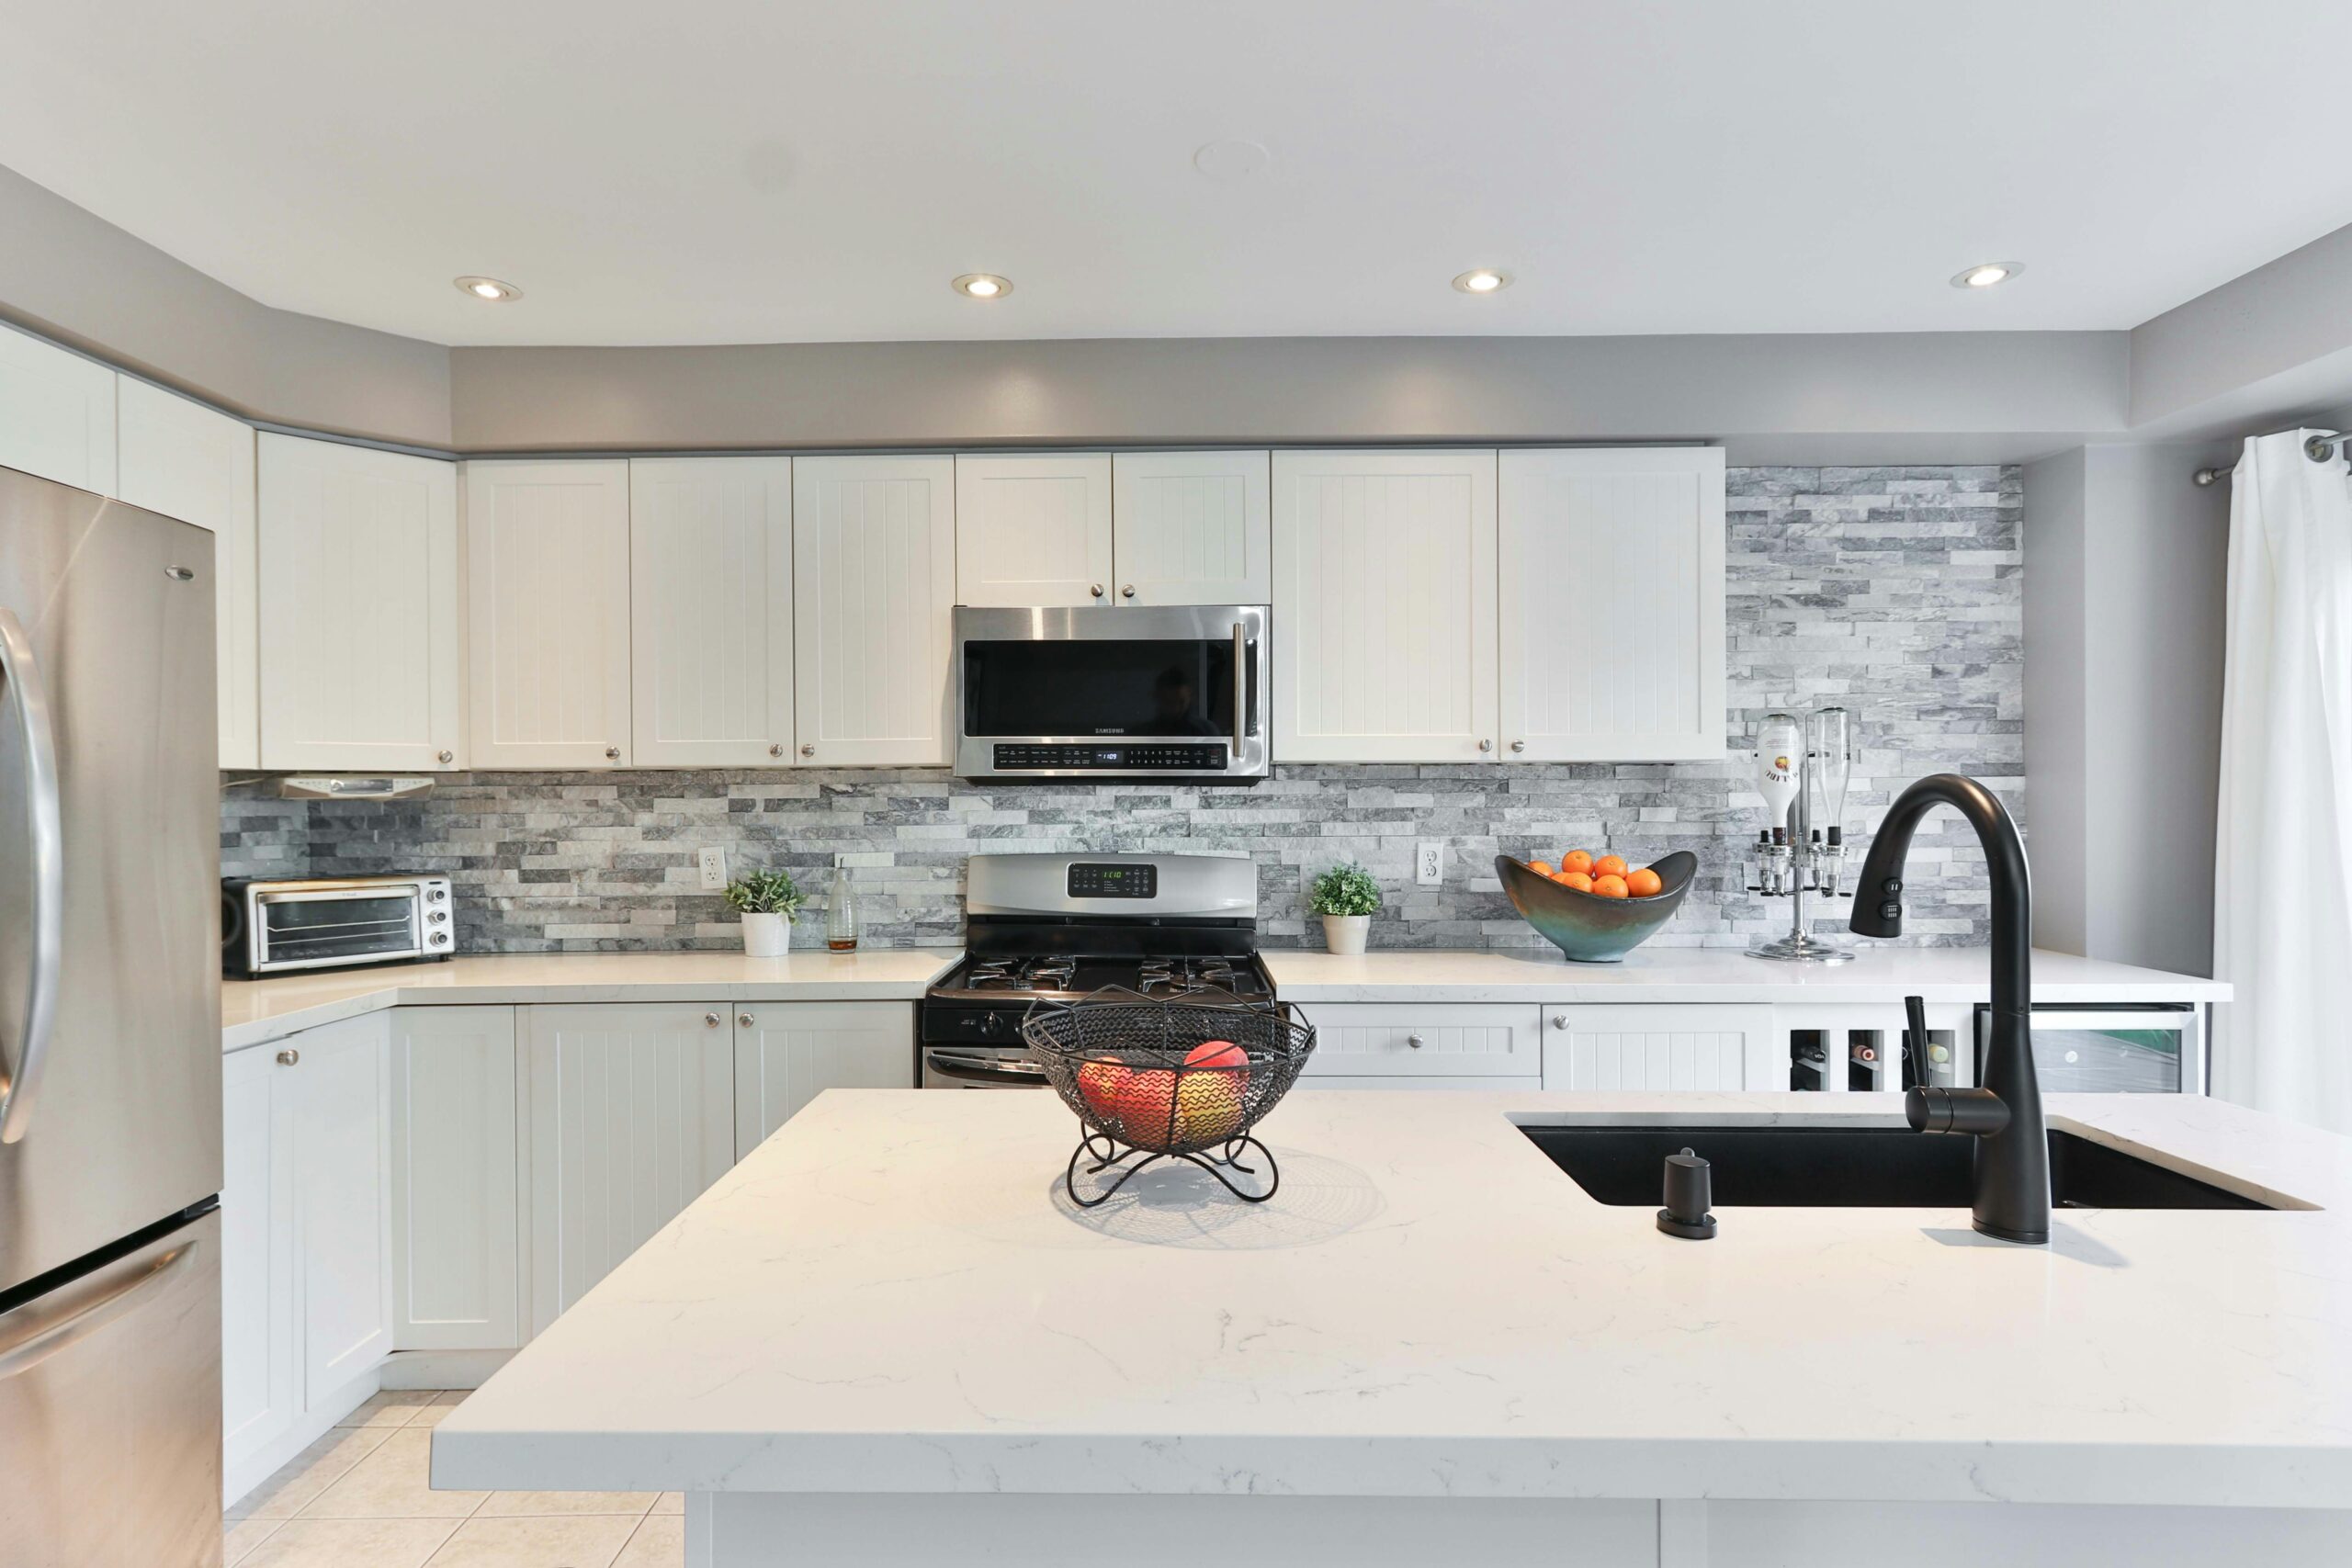 Sleek and modern smart kitchen with integrated high-tech appliances and white cabinetry, featuring a central island with a black countertop and advanced sink faucet, illuminated by natural light.